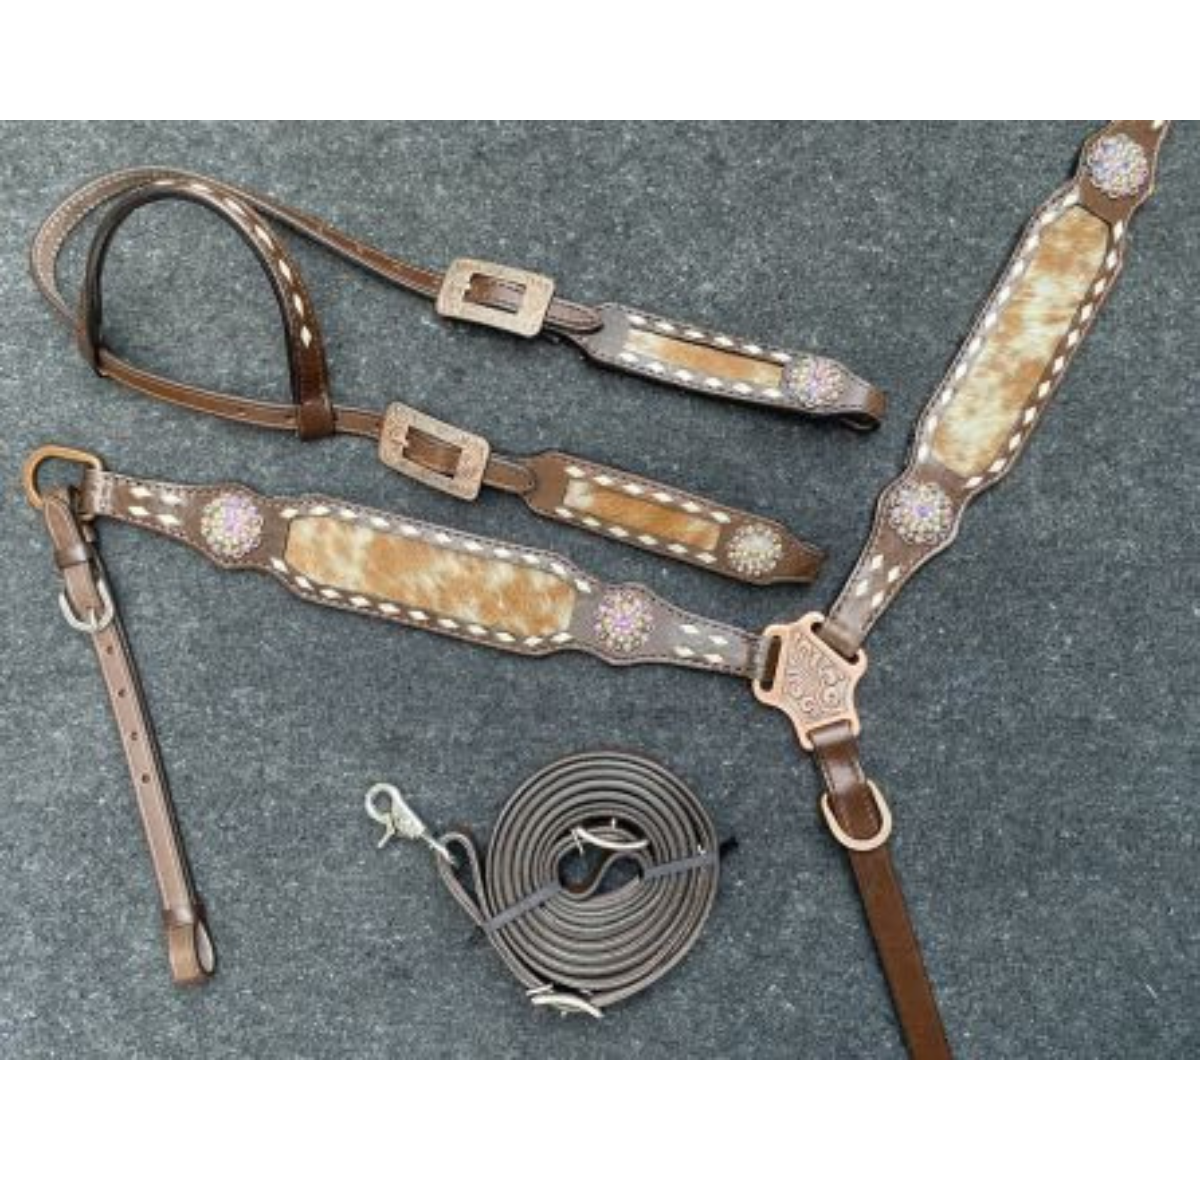 Showman ® Brown and White hair on cowhide One Ear Headstall and Breast Collar Set, - Double T Saddles